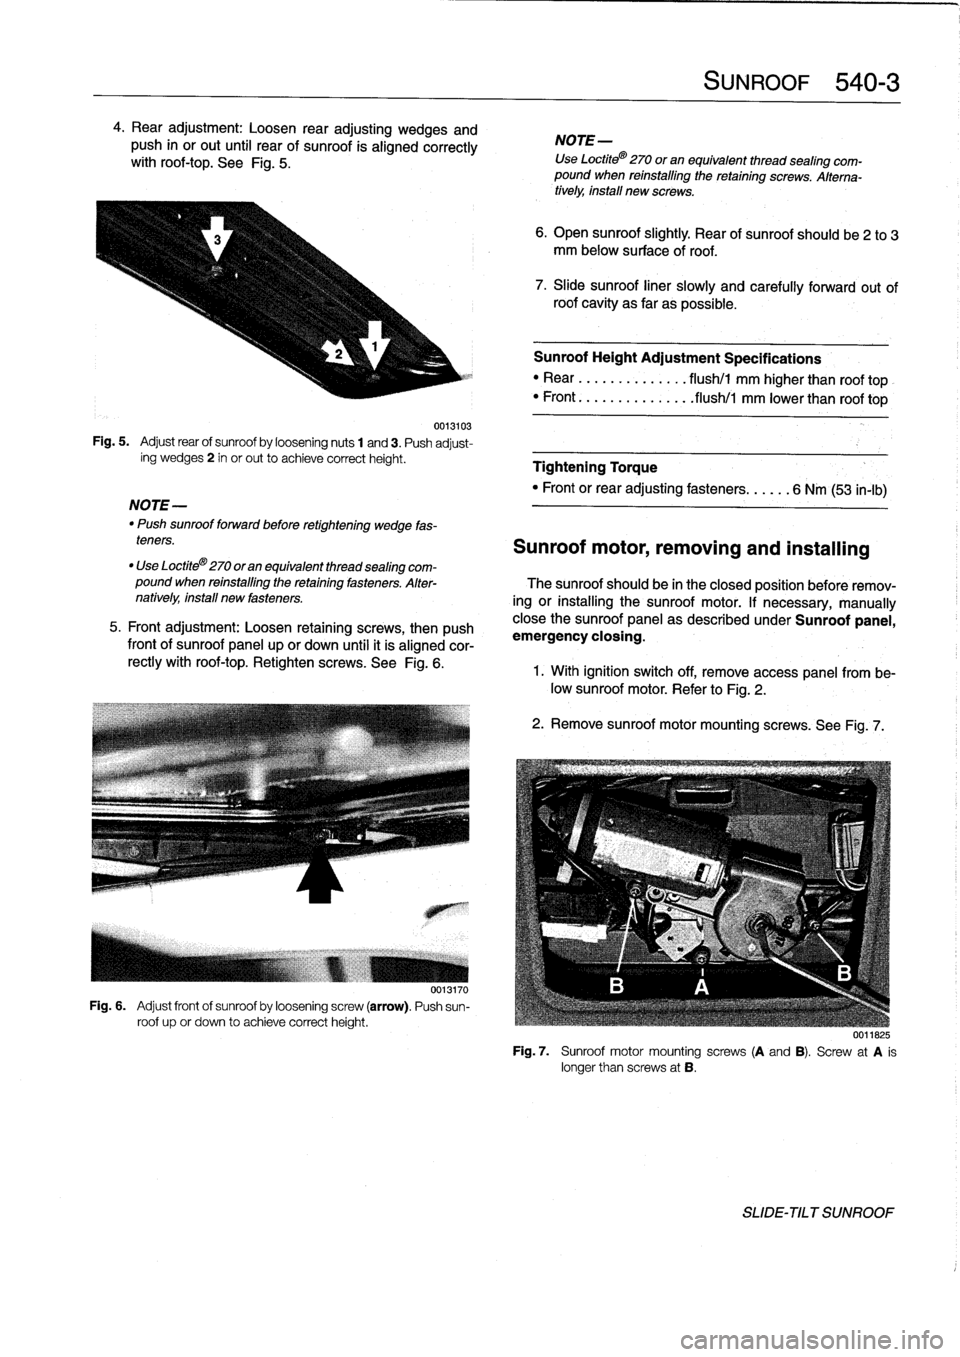 BMW M3 1992 E36 Workshop Manual 4
.
Rear
adjustment
:
Loosen
rear
adjusting
wedges
and
push
in
or
out
until
rear
of
sunroof
is
aligned
correctly
withroof-top
.
See
Fig
.
5
.

0013103
Fig
.
5
.

	

Adjust
rear
of
sunroof
by
loosening